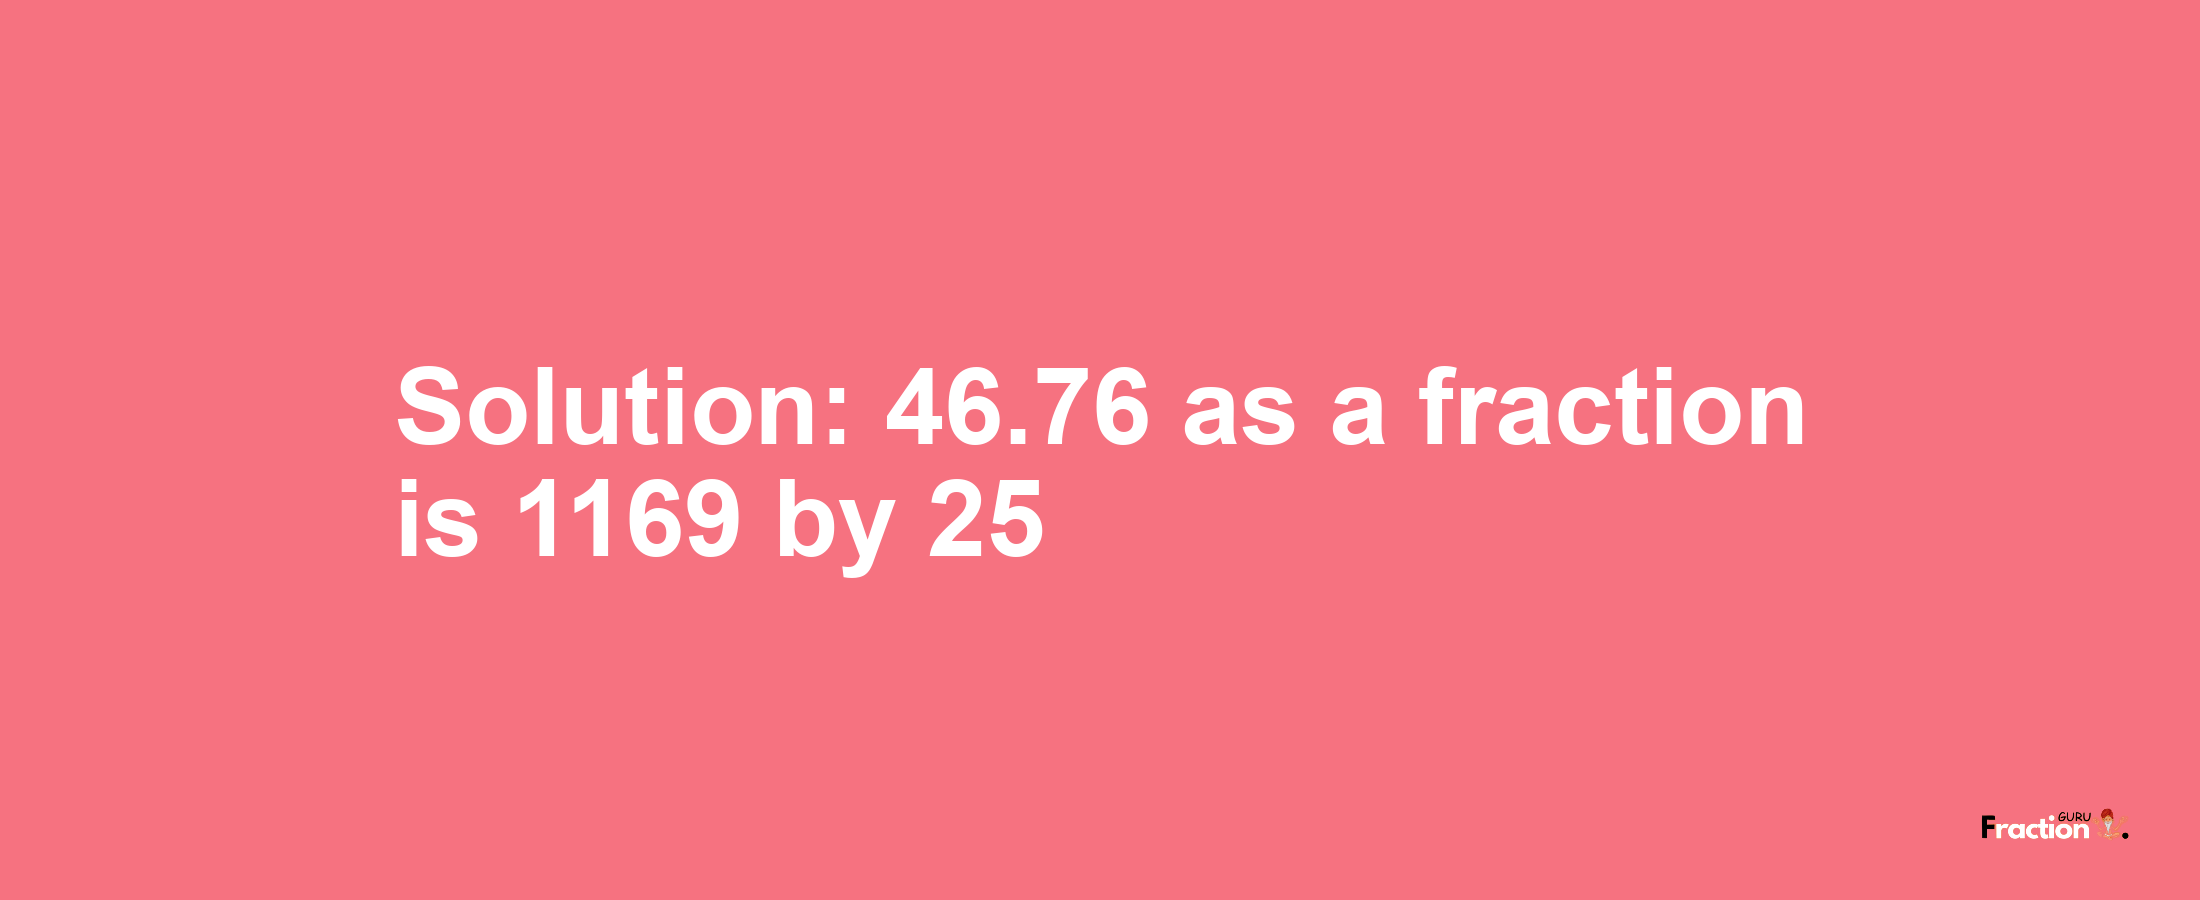 Solution:46.76 as a fraction is 1169/25